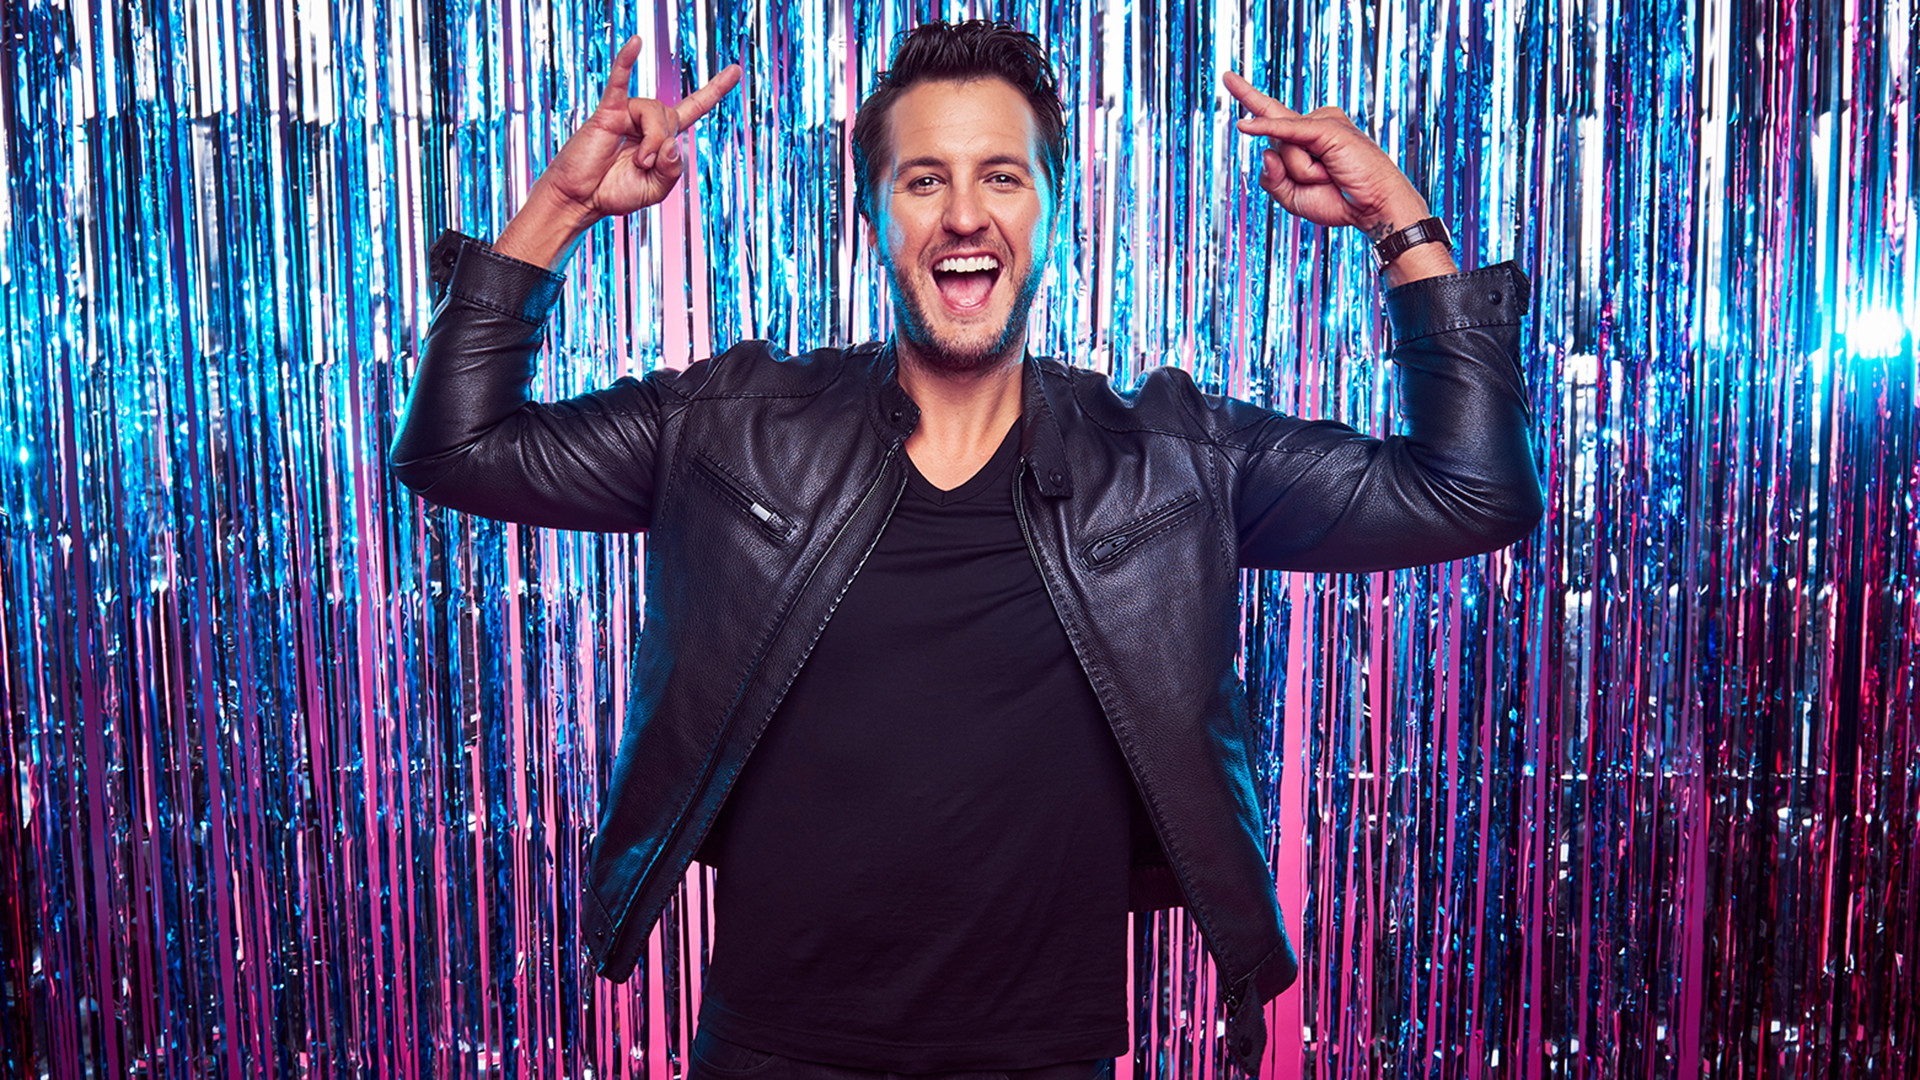 Luke Bryan Wallpapers 79 Images | Free Download Nude Photo Gallery